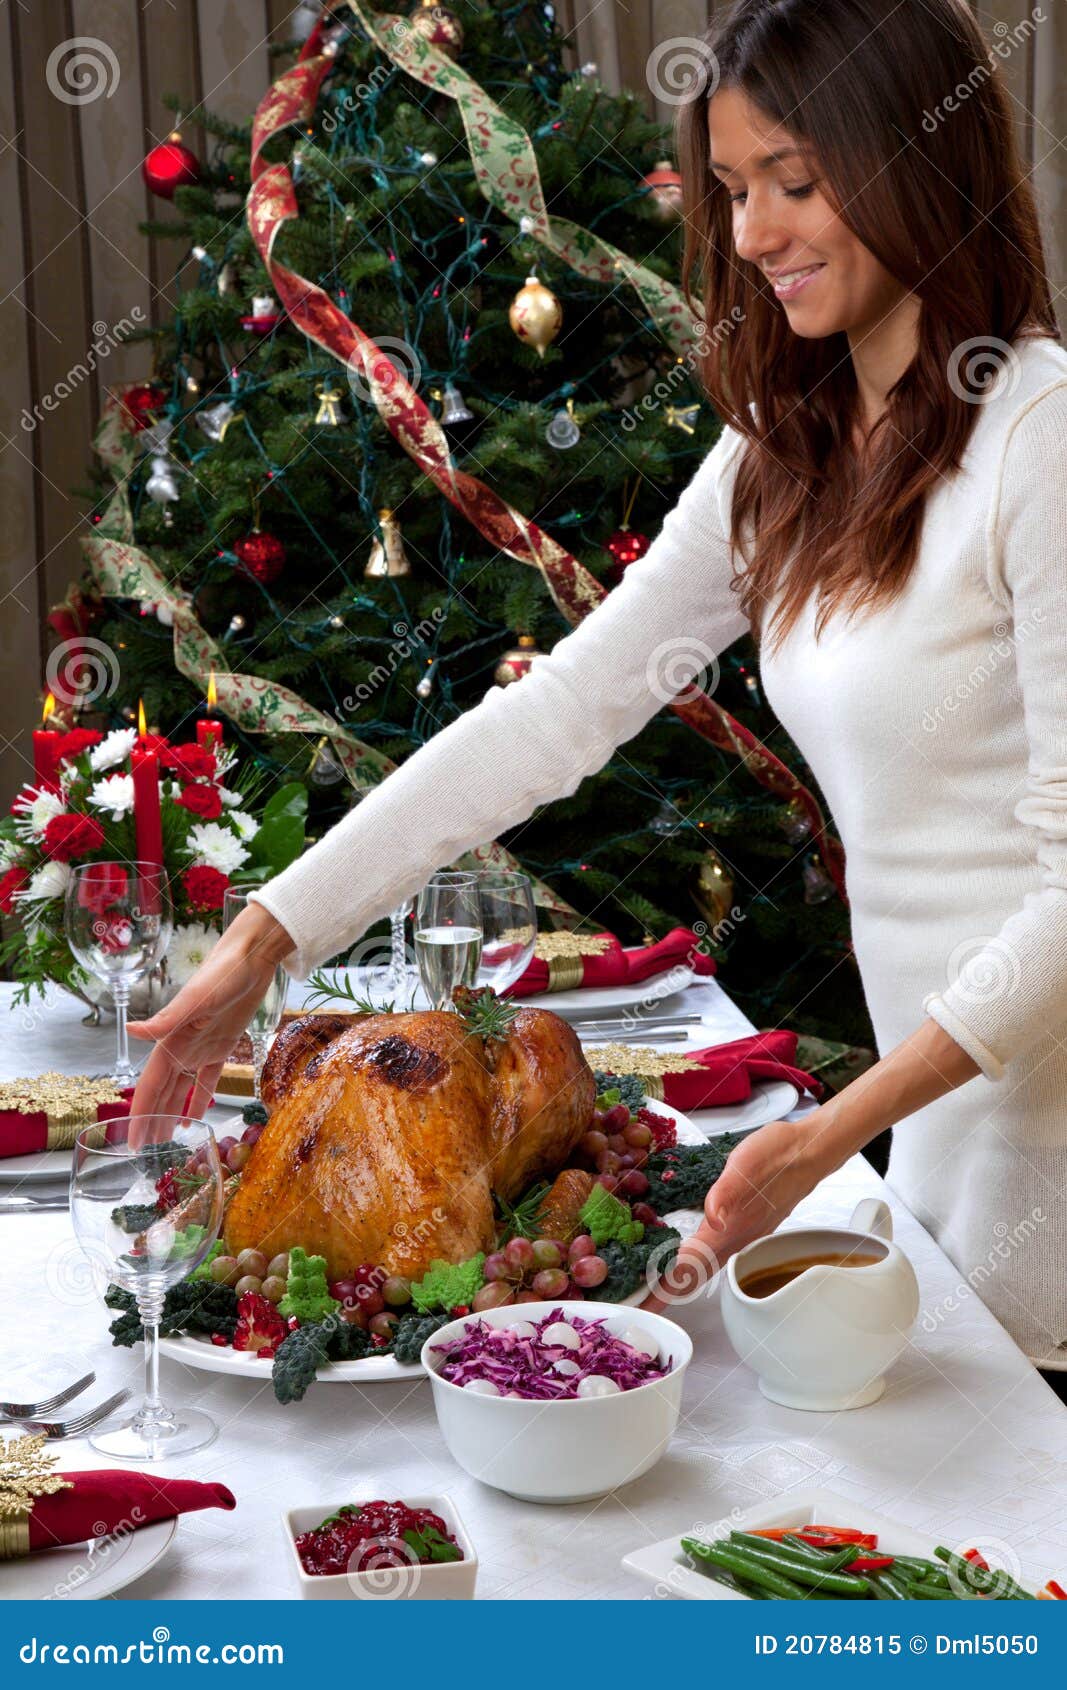 Christmas Roasted Turkey Woman Serving Royalty Free Stock